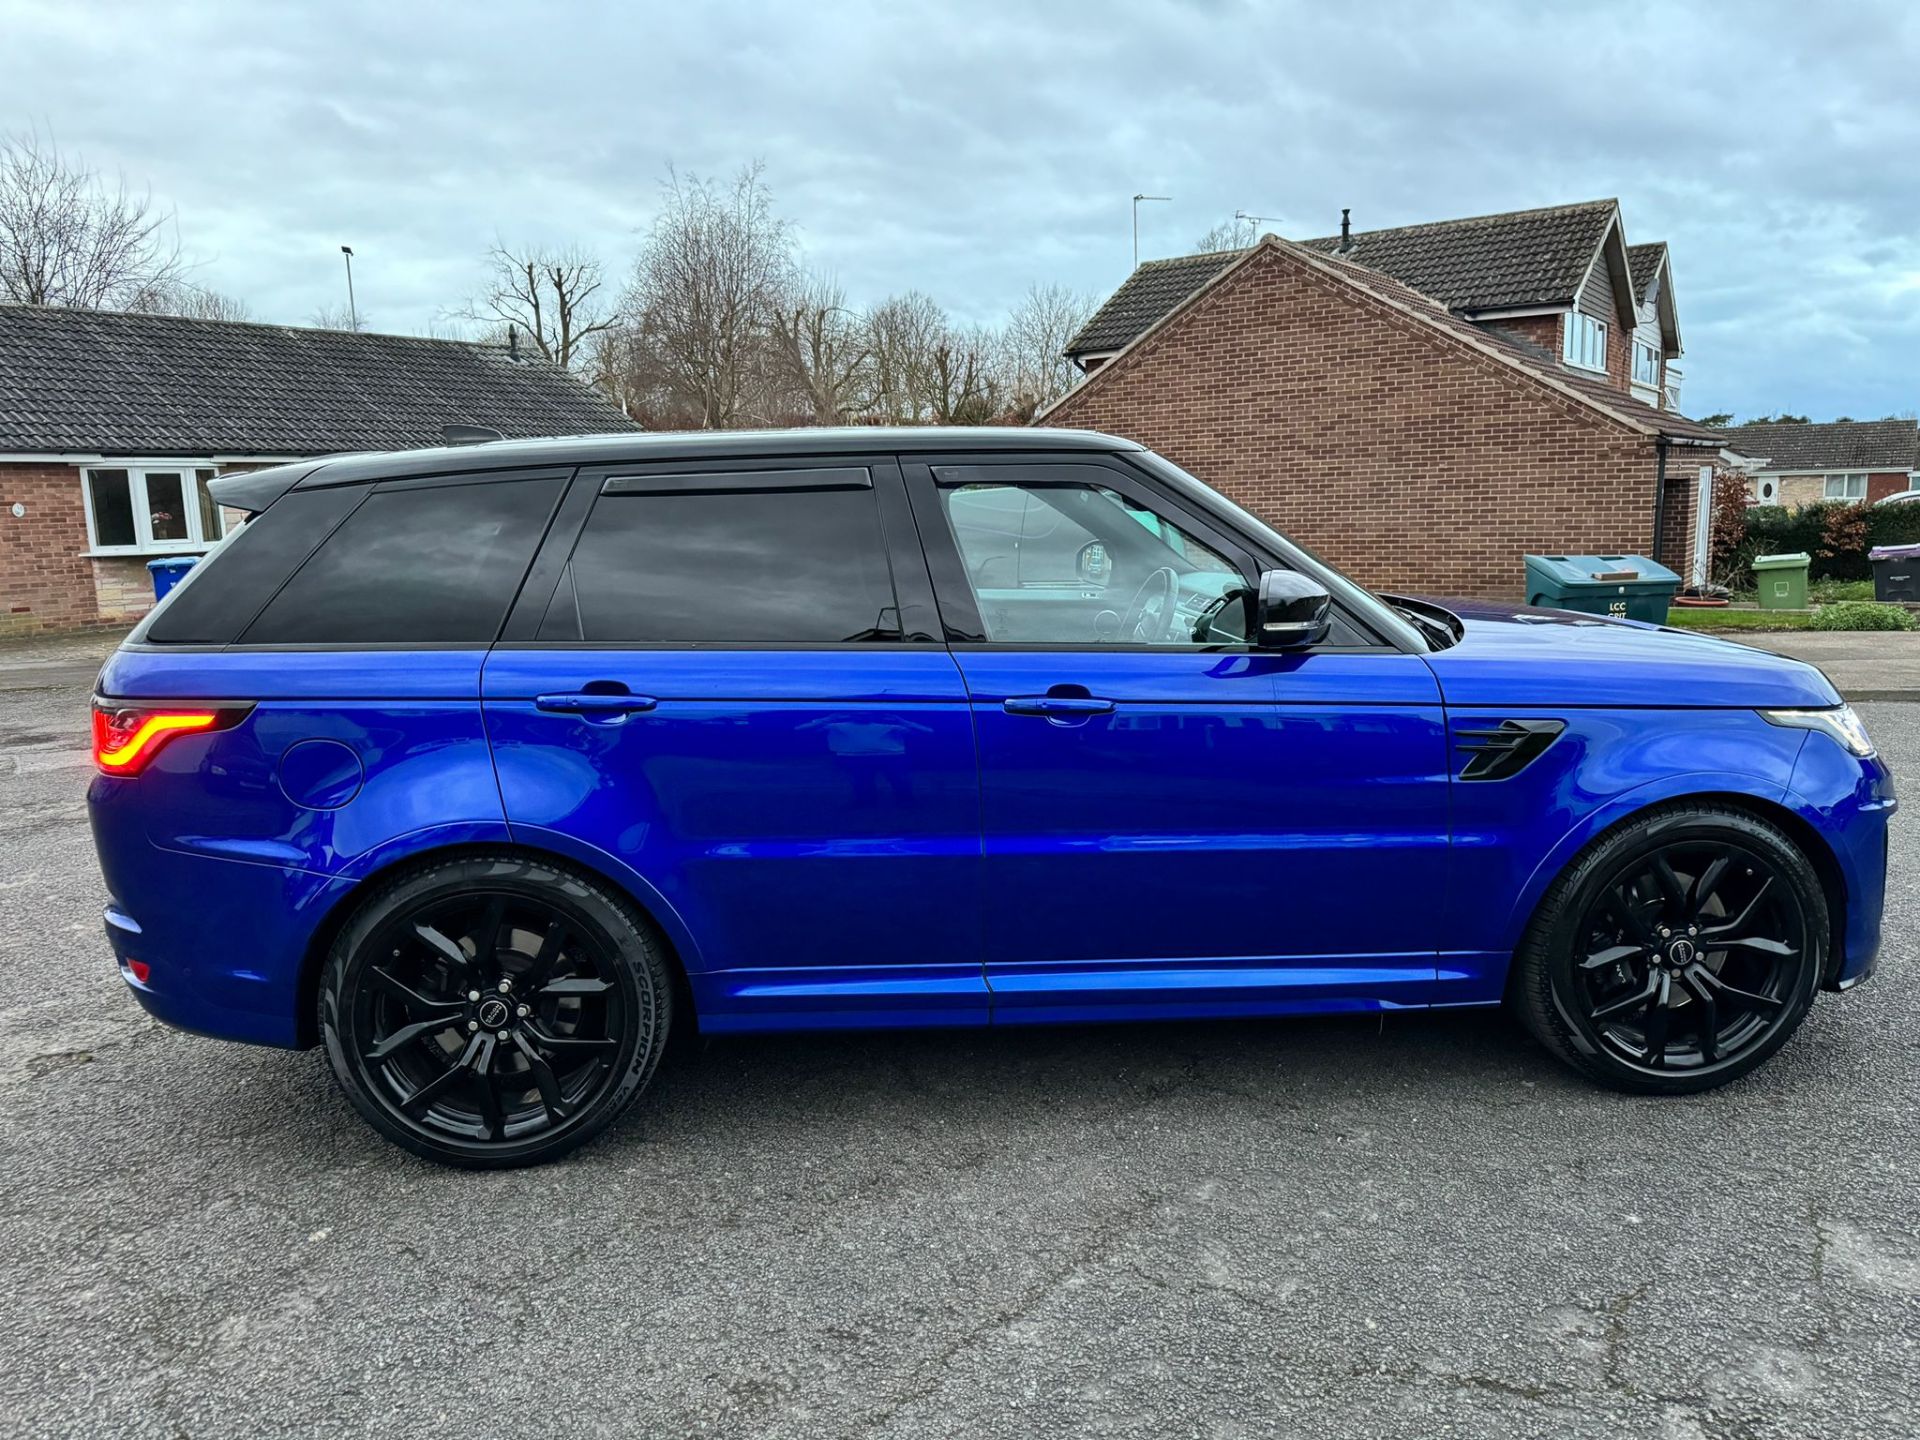 2018 18 RANGE ROVER SVR - 62K MILES WITH FULL LAND ROVER HISTORY - EXTREMELY CLEAN EXAMPLE - Image 9 of 10